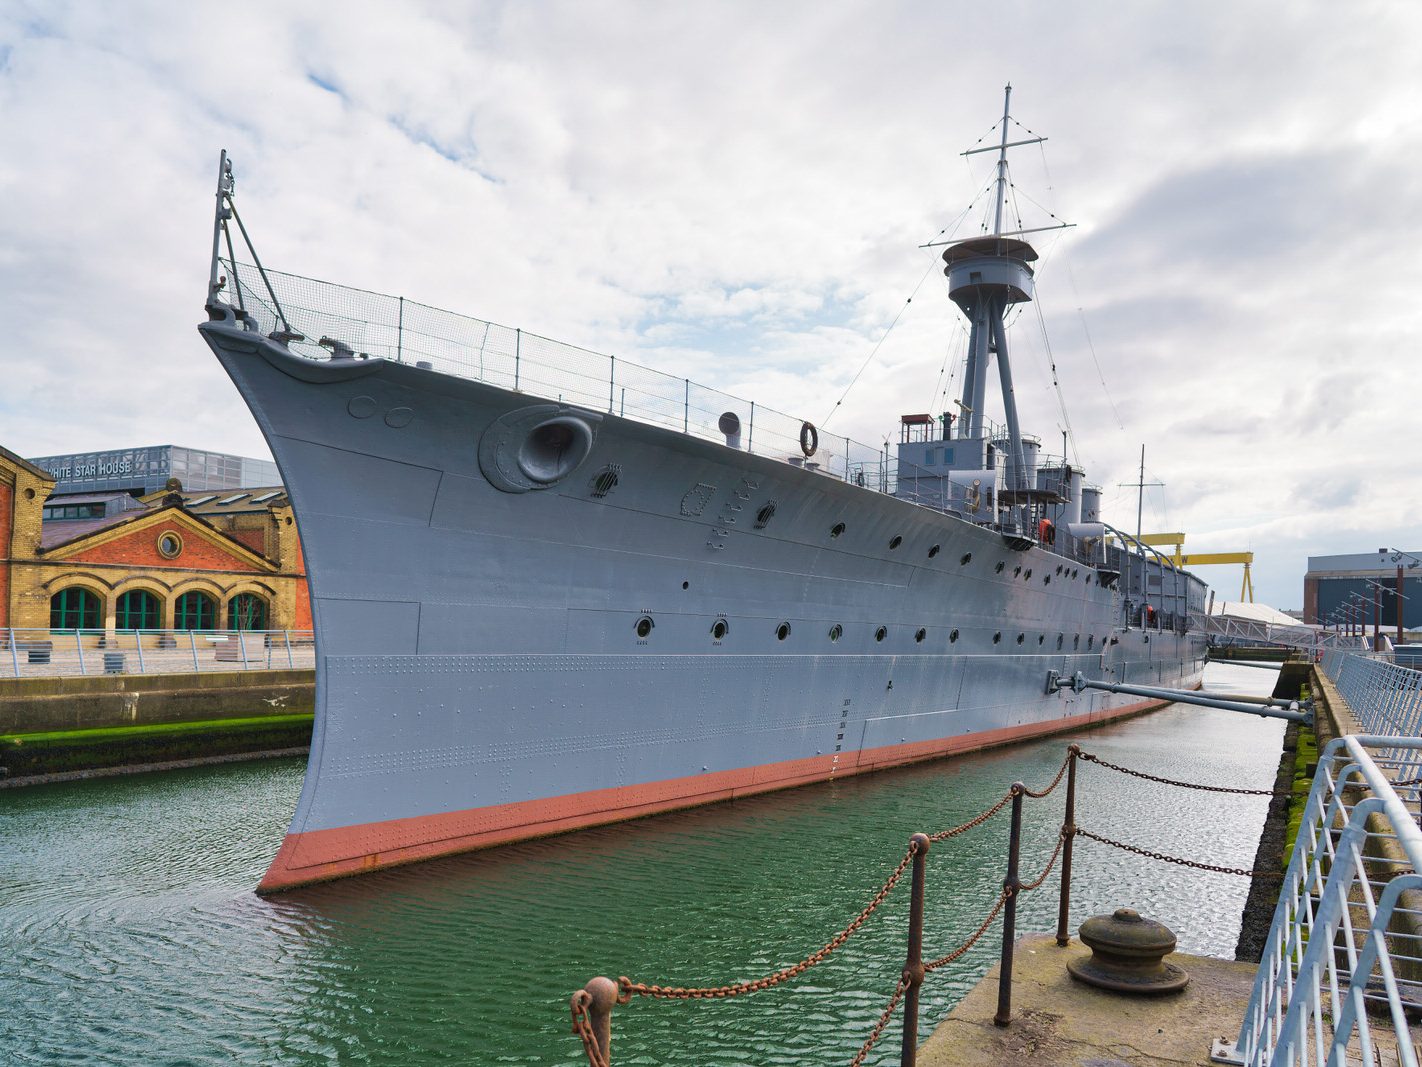 HMS CAROLINE IS AN ATTRACTIVE SHIP [NOW A MUSEUM SHIP AT ALEXANDRA DOCK IN BELFAST]-224596-1